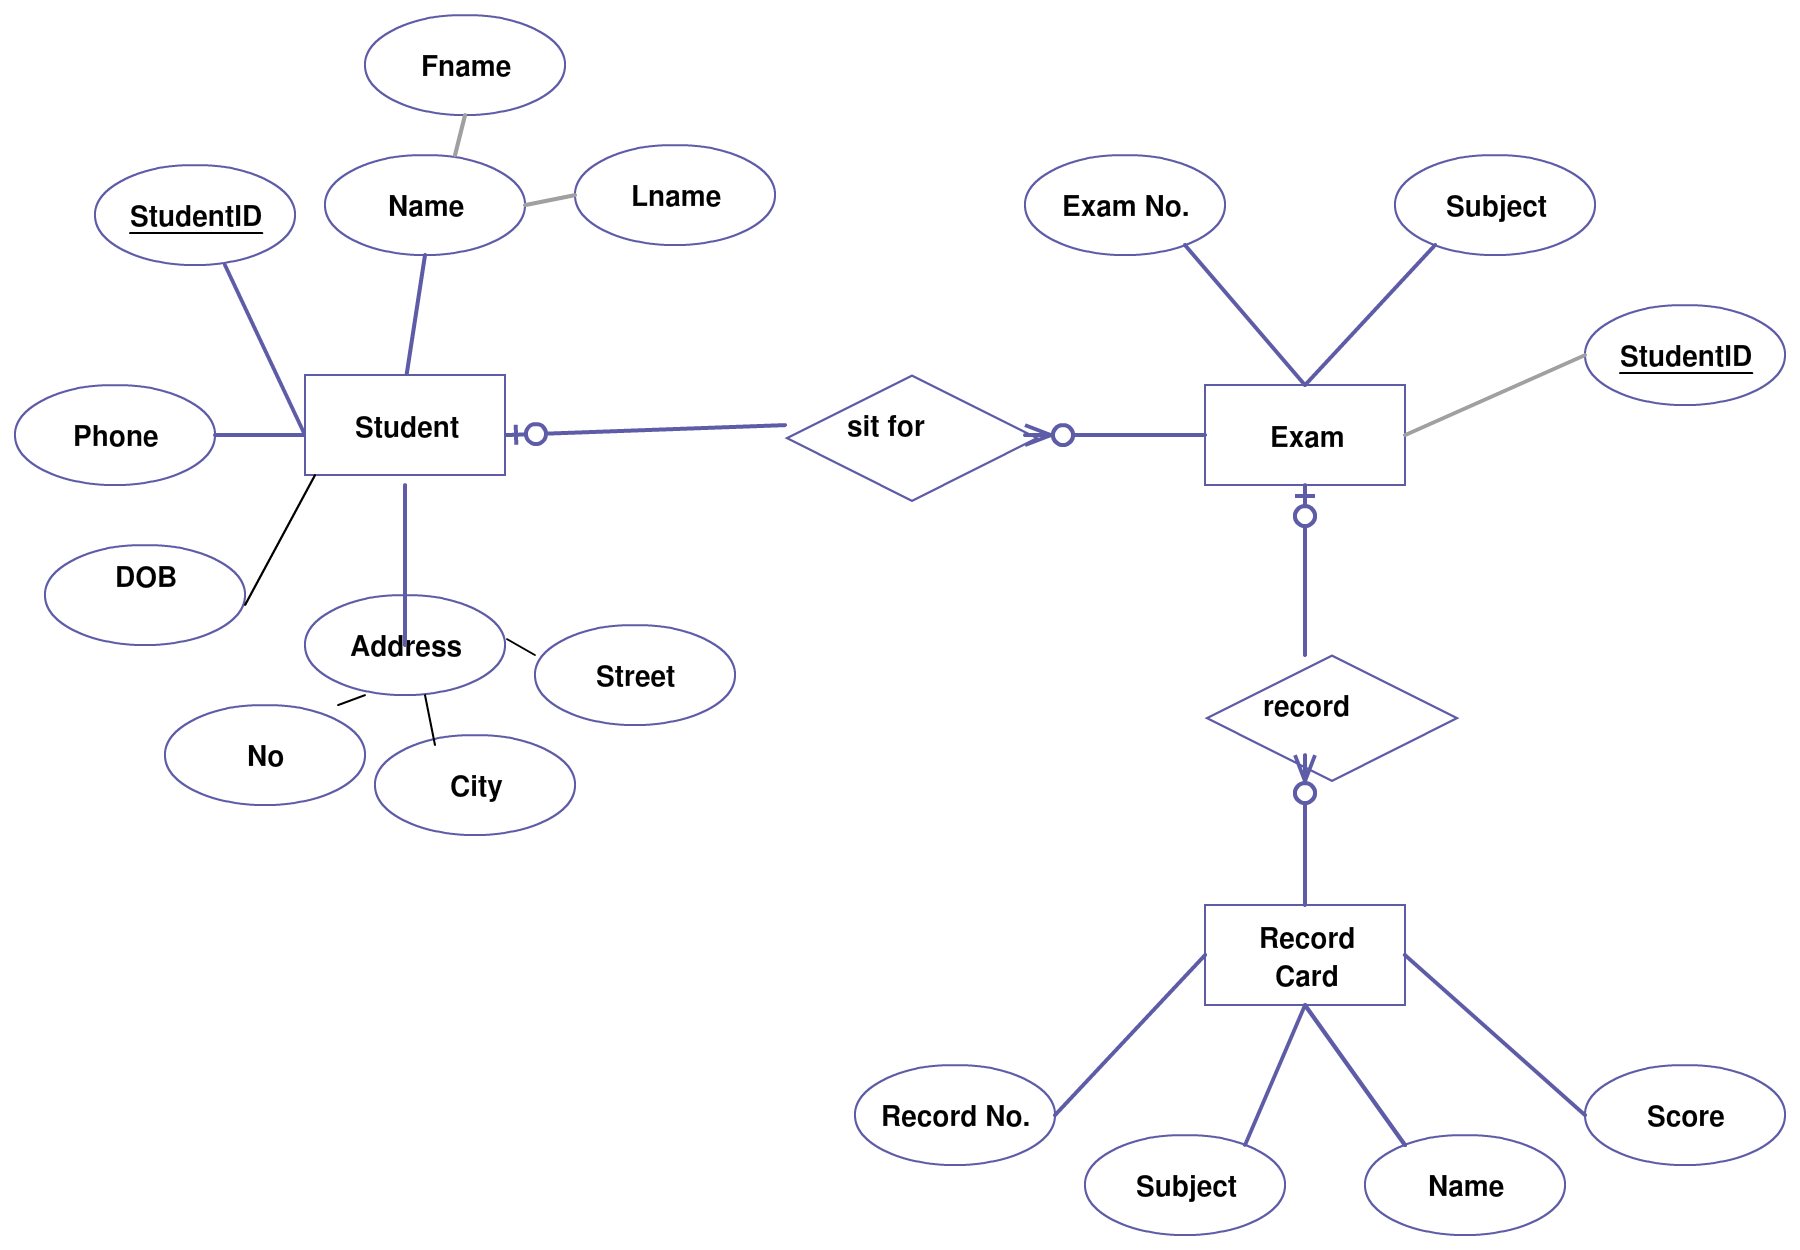 Entity Relationship Diagram (Er Diagram) Of Student intended for How To Make Entity Relationship Diagram